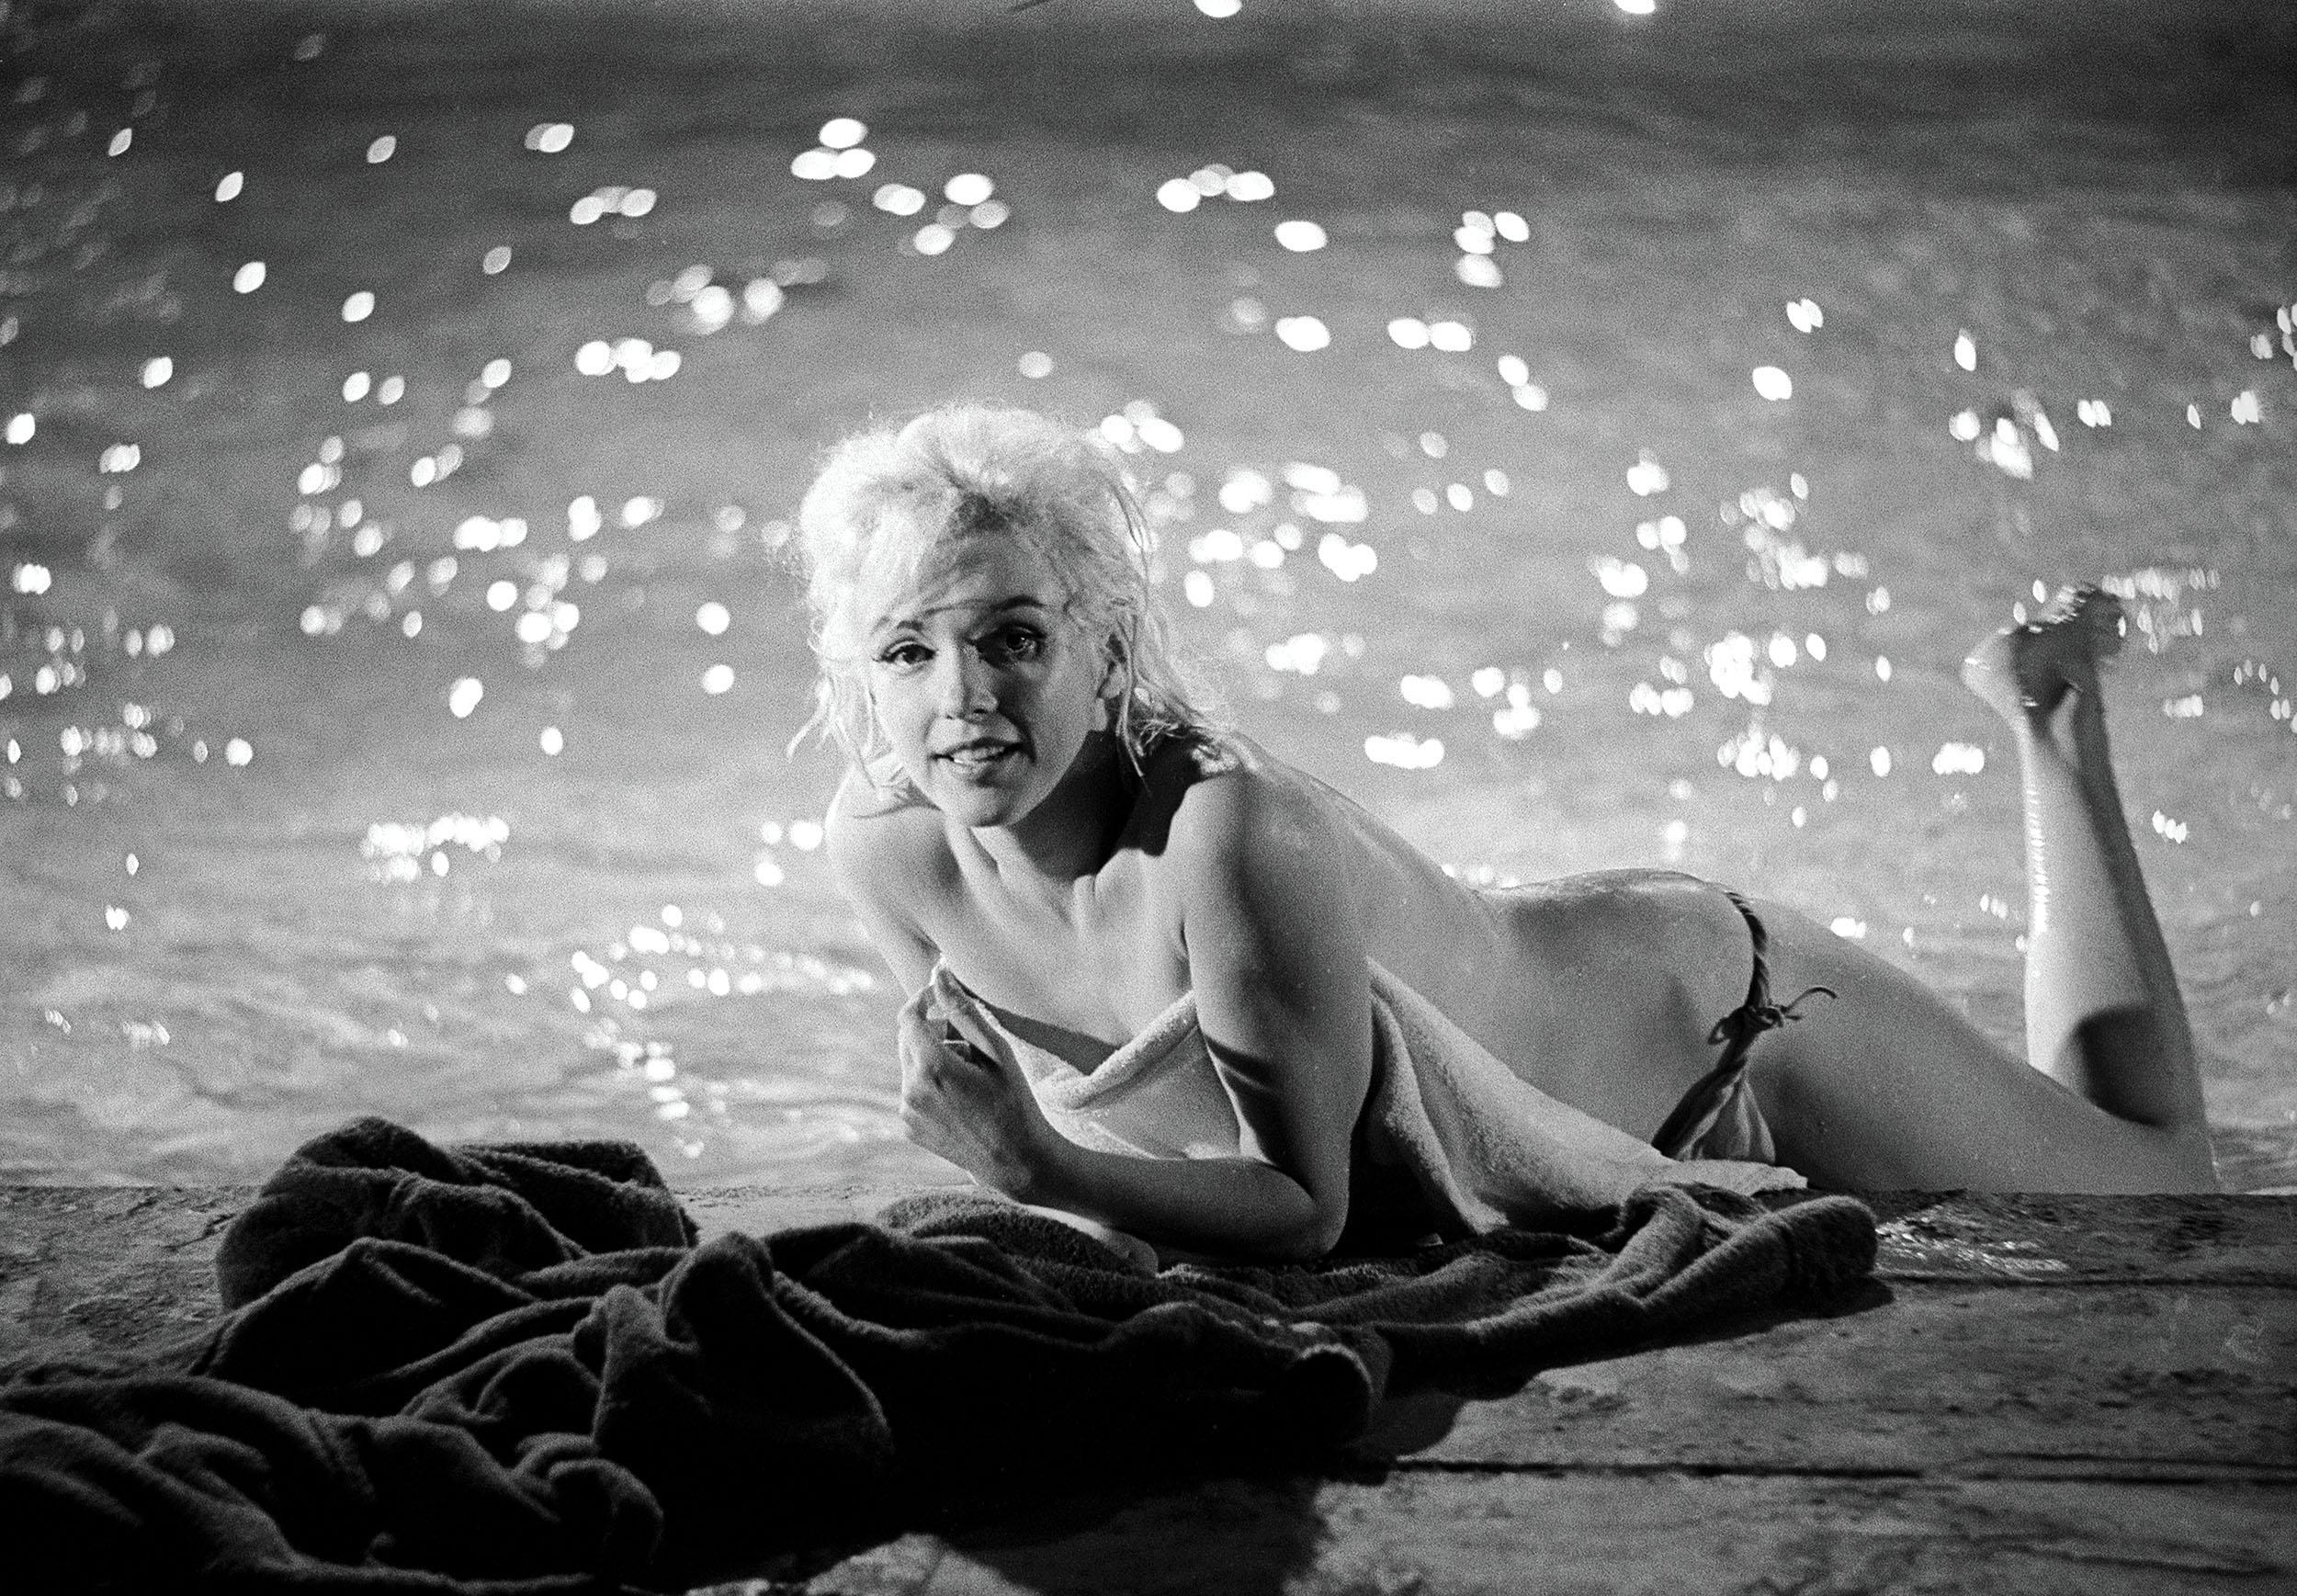 Marilyn Monroe’s status as an enduring figure of glamour made her one of the most famous figures in American history. Of all the images shot of the incomparable movie star, the most iconic were those taken by famed photographer, director and author,